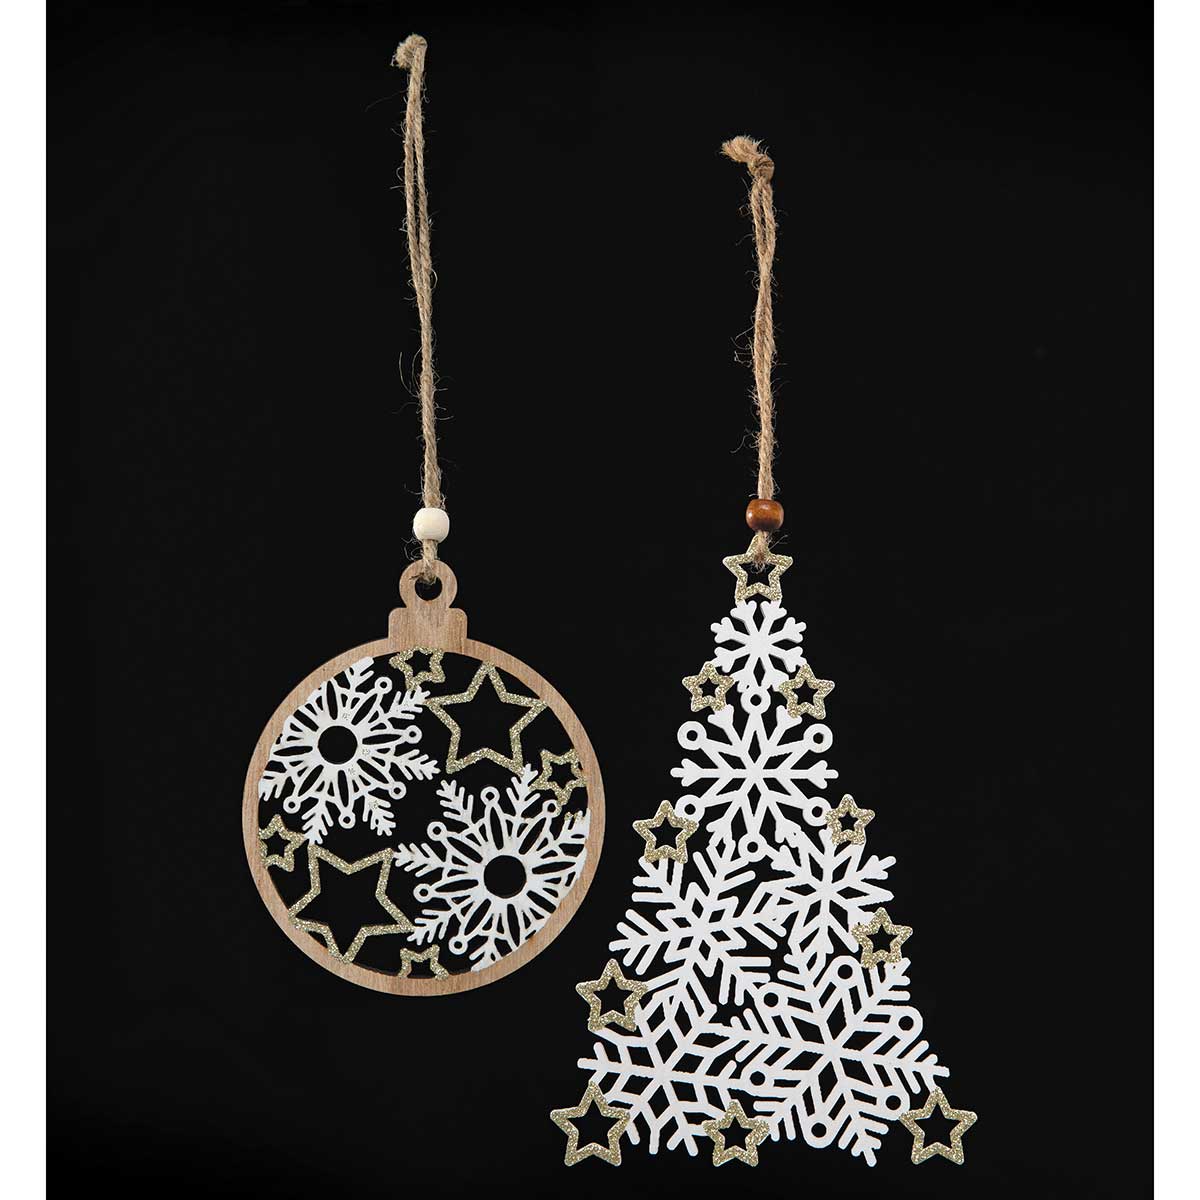 ORNAMENT TREE OF SNOWFLAKES 4.75IN X .25IN X 7.25IN - Click Image to Close